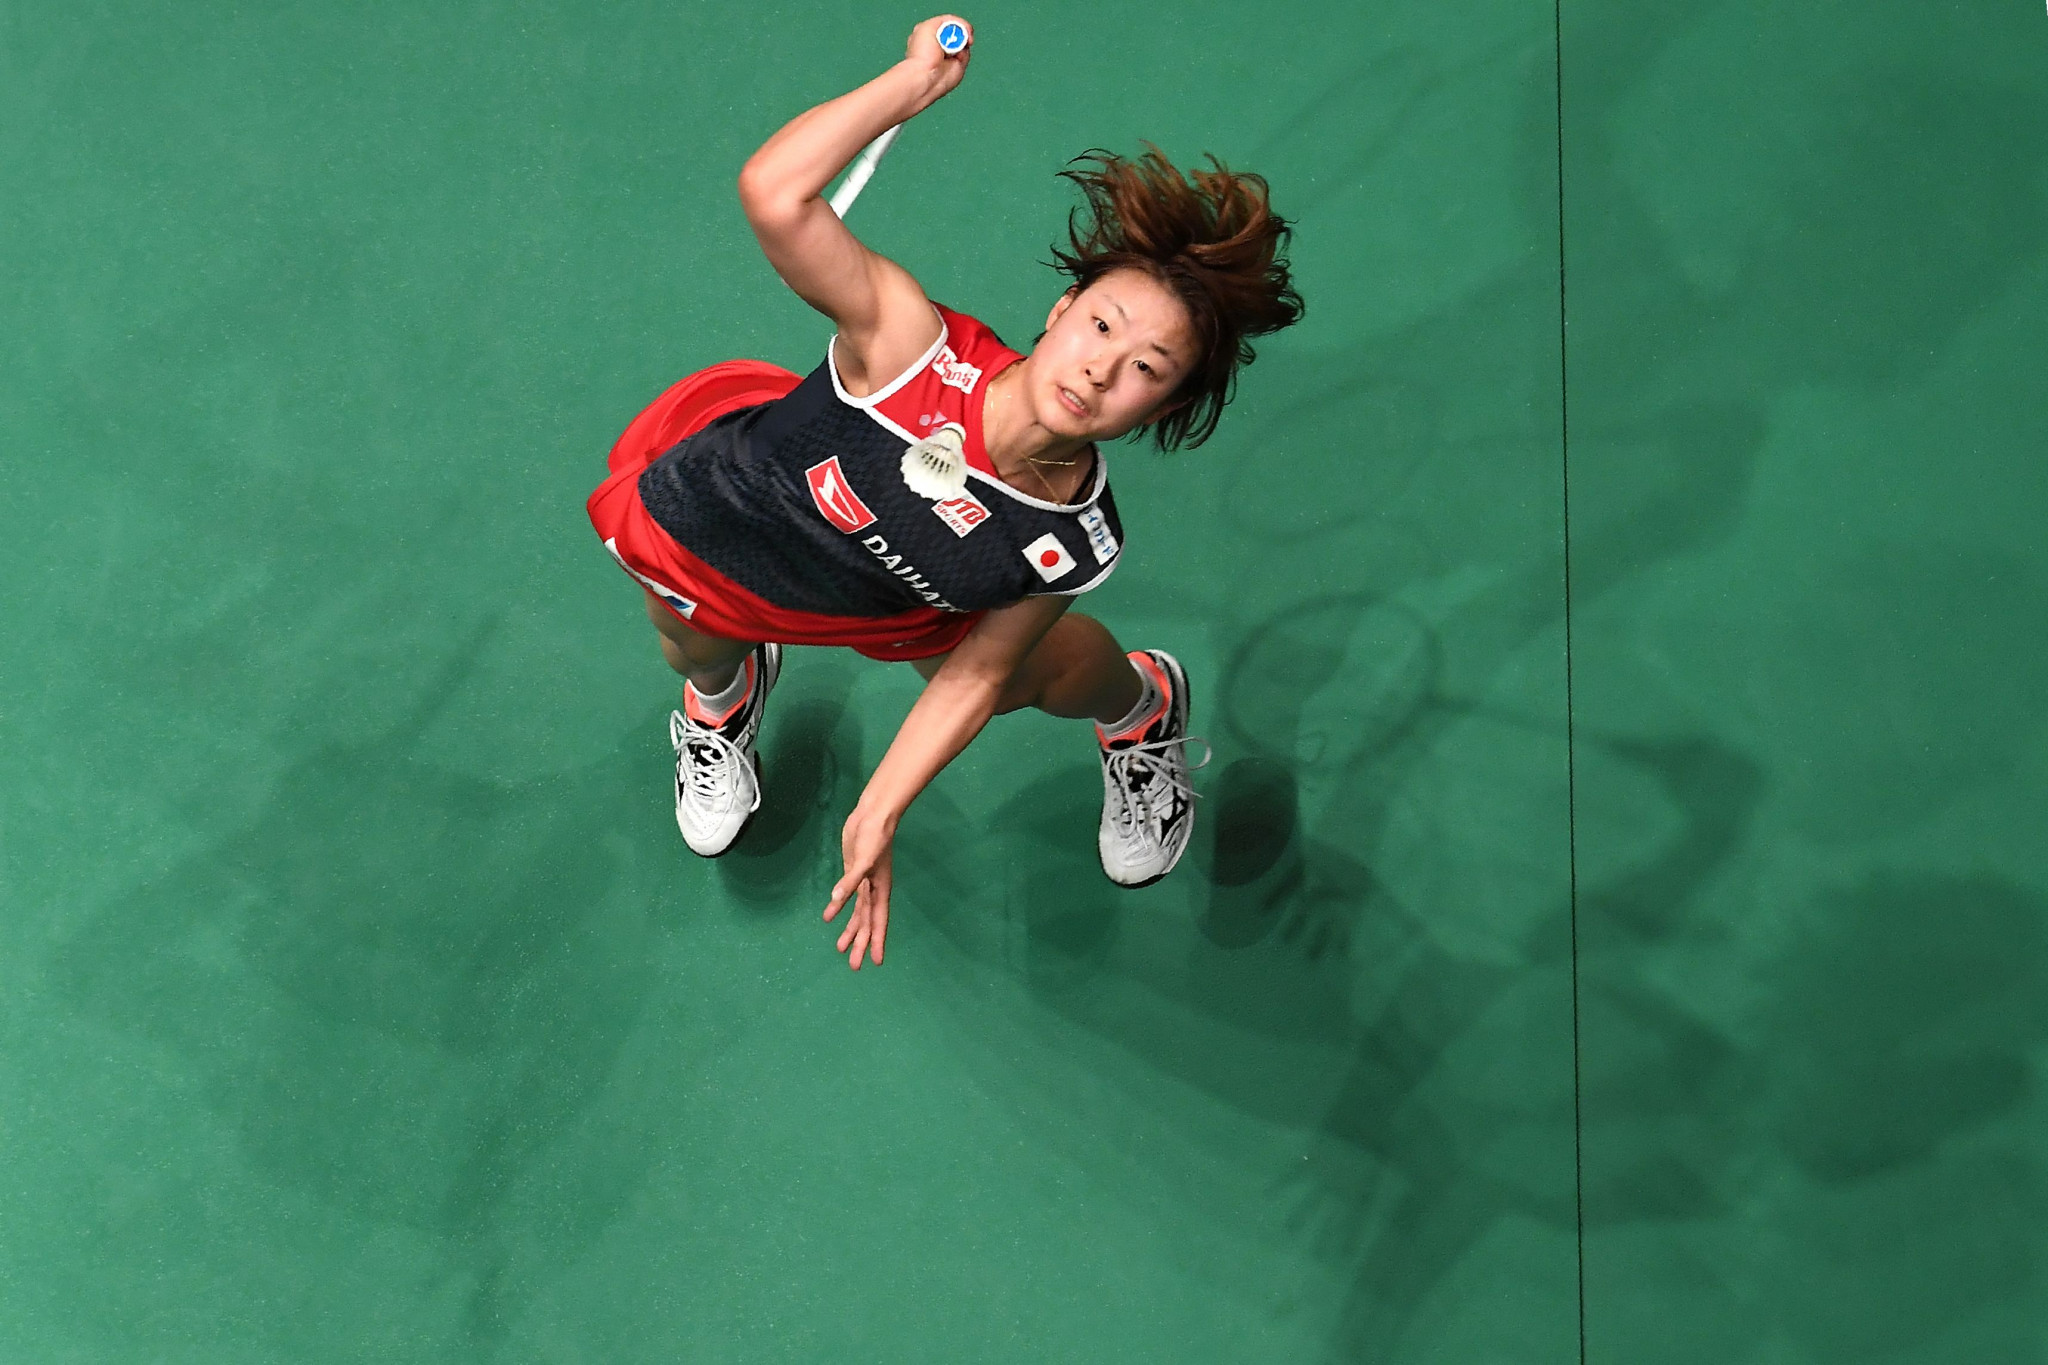 Japan's Nozomi Okuhara remains on course for success in the women's singles event ©Getty Images